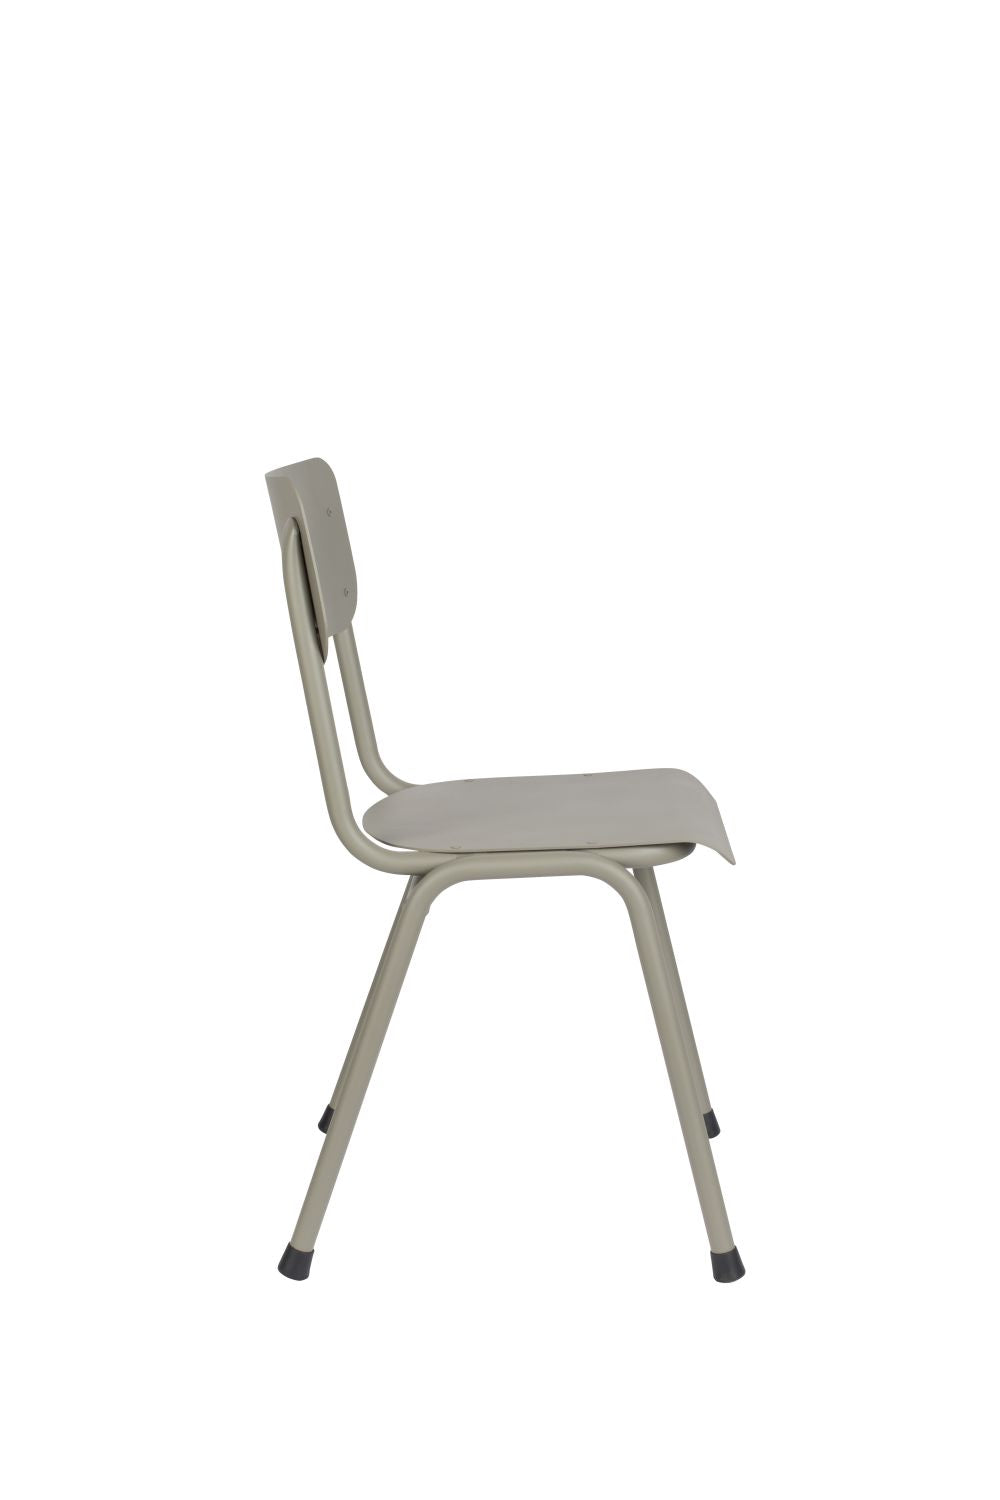  Zuiver-Zuiver Set of 2 Outdoor Chairs Back To School Moss Grey-Grey 29 